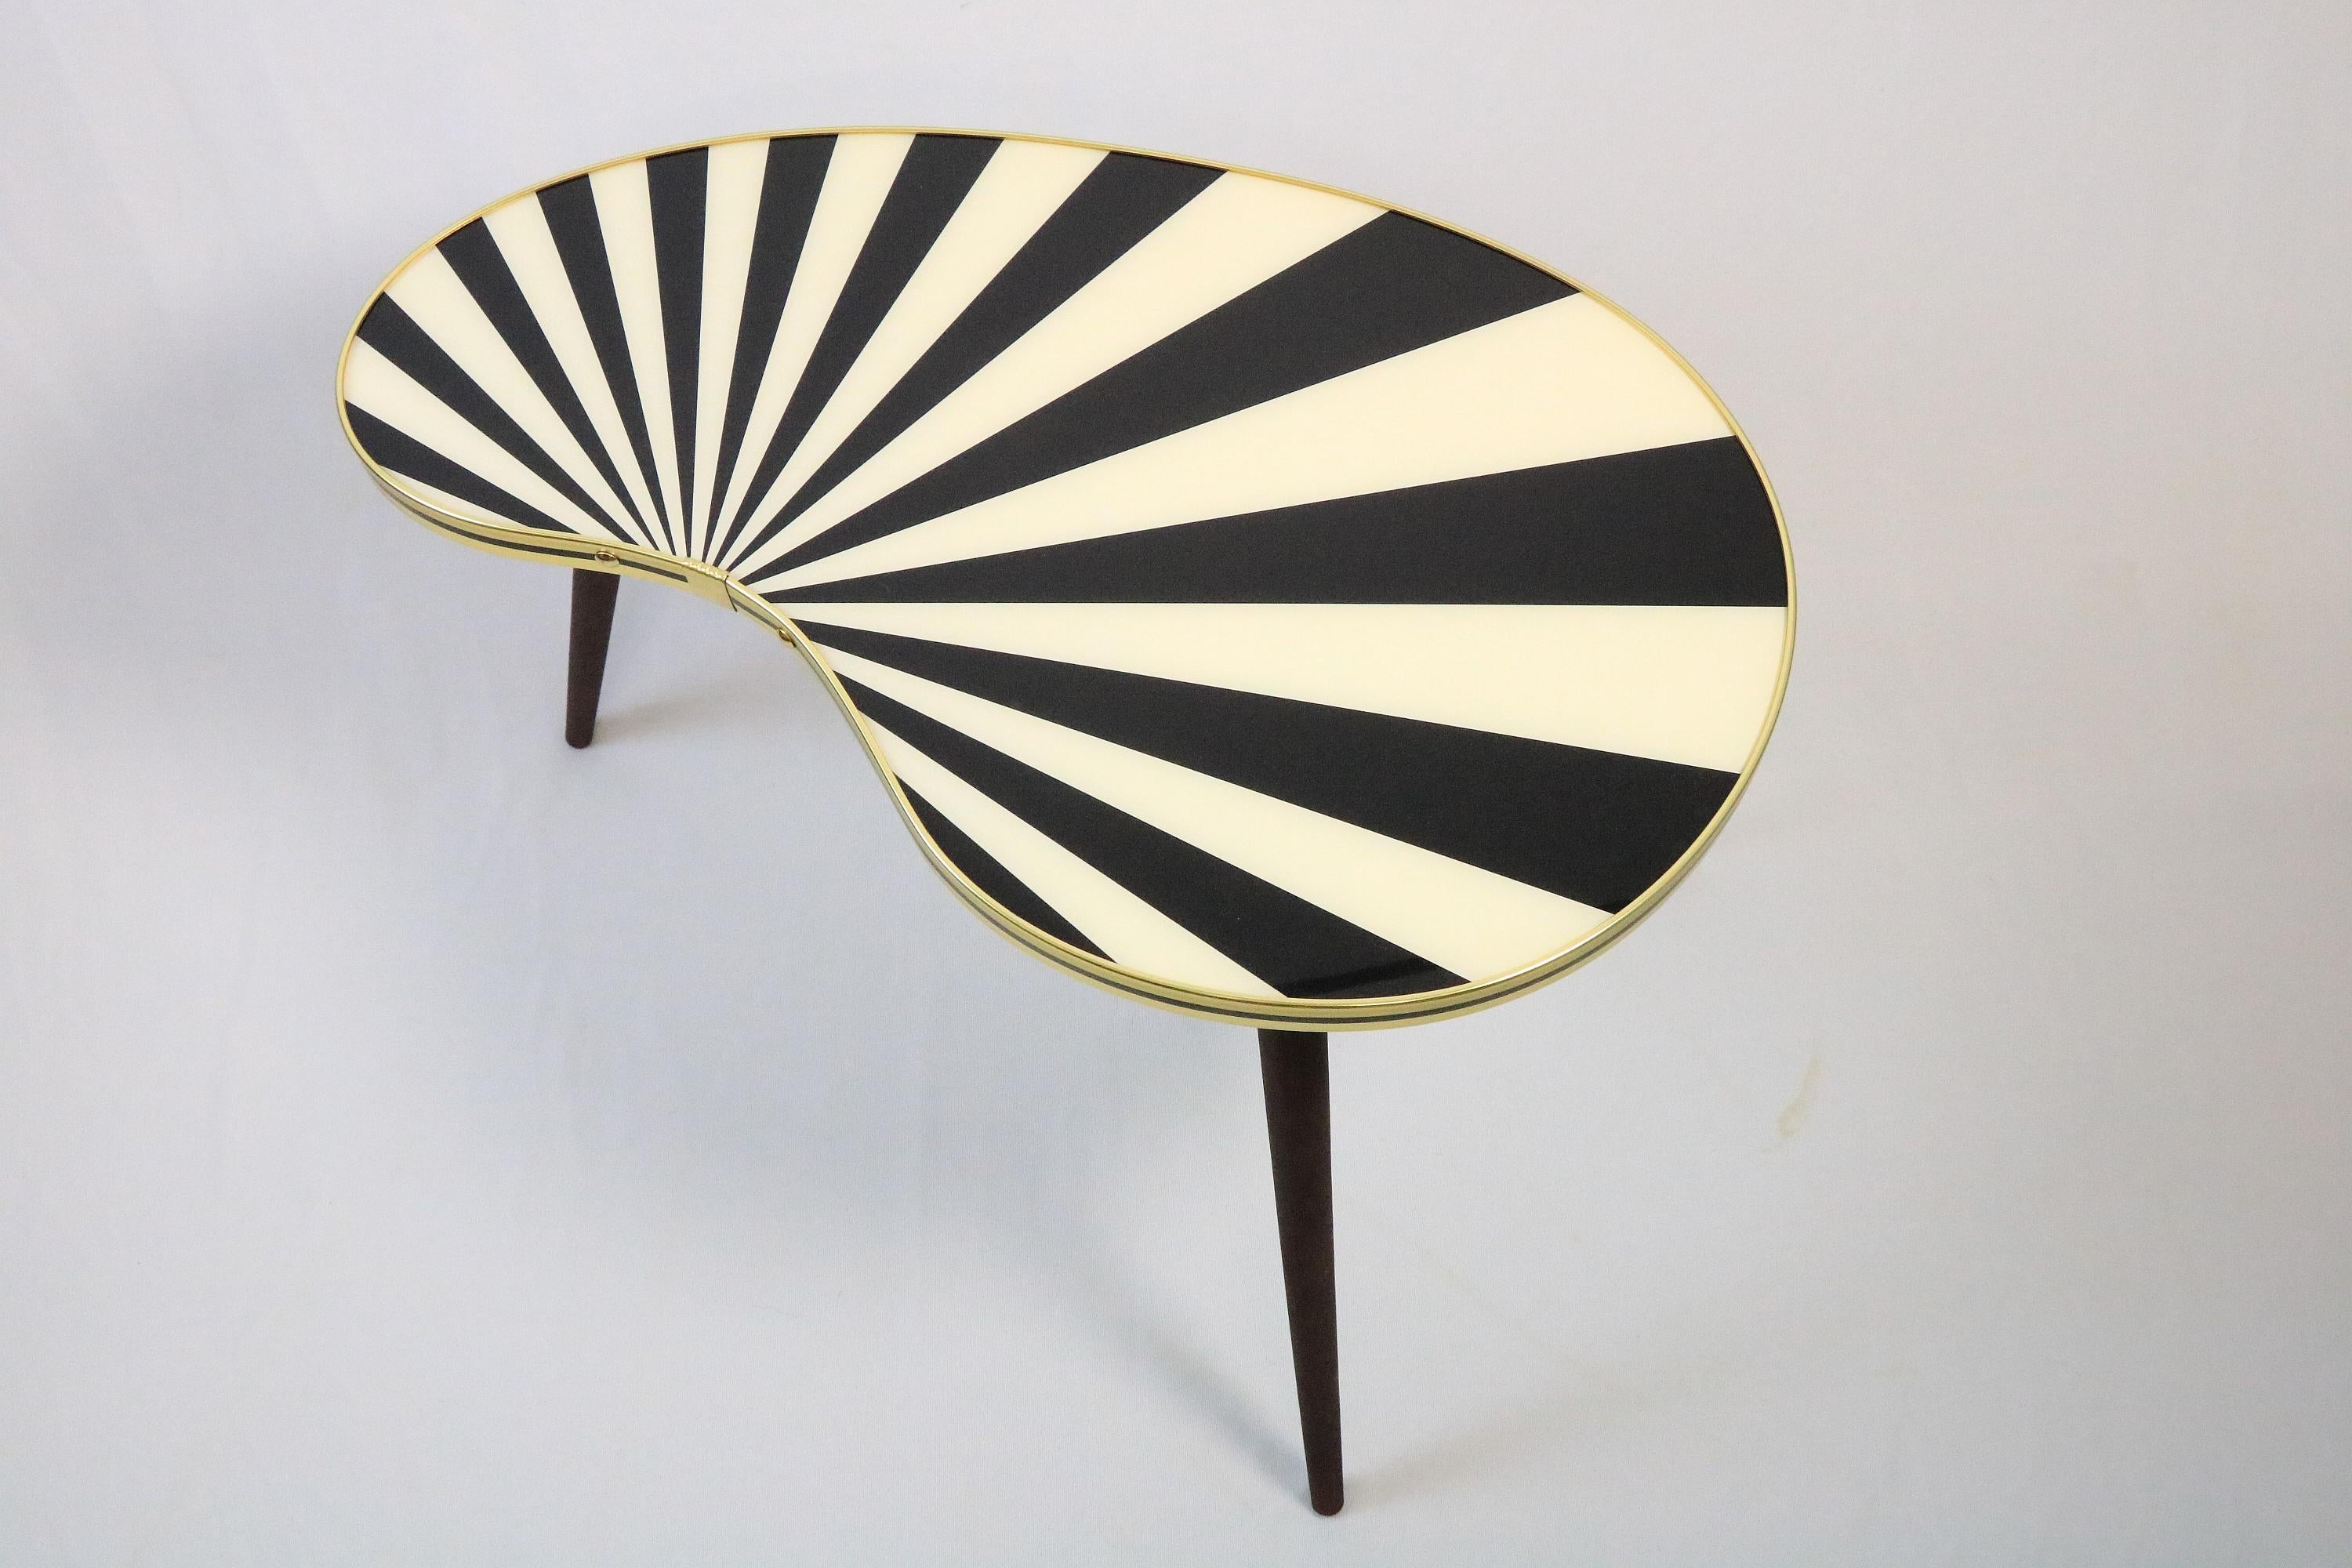 Hand-Crafted Large Side Table, Kidney Shaped, Black-White Stripes, 3 Elegant Legs, 50s Style For Sale